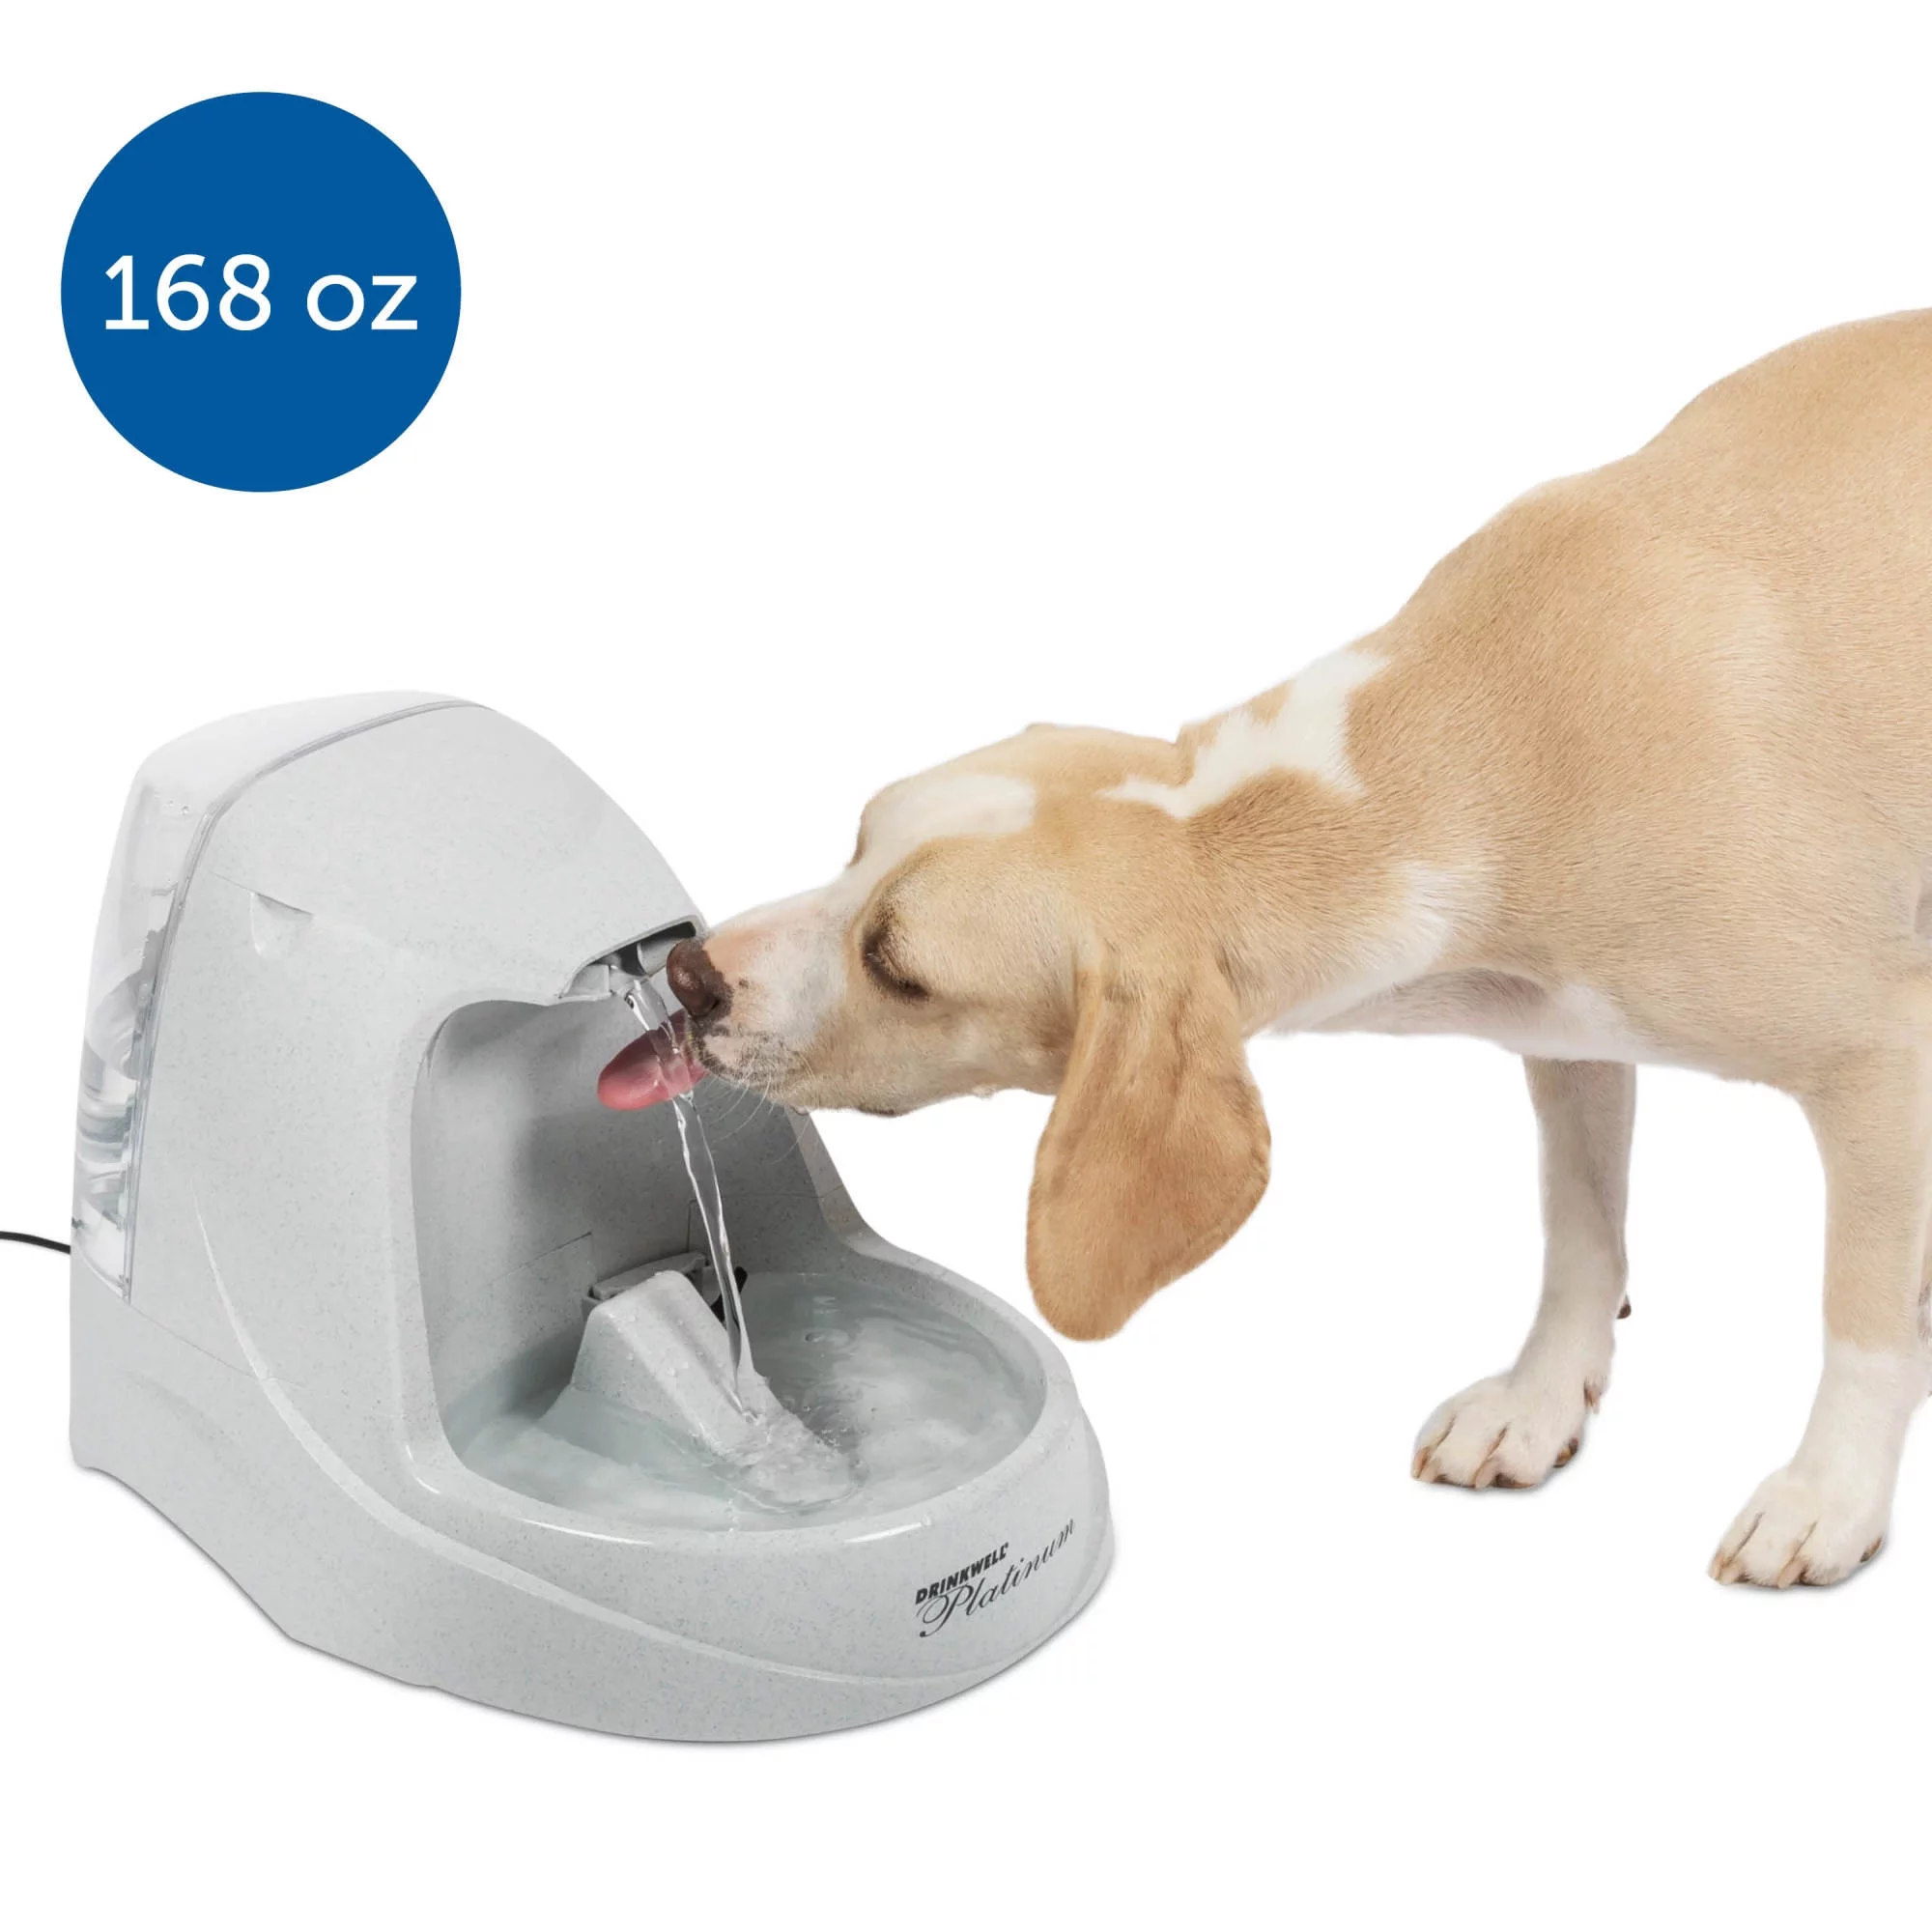 PetSafe Drinkwell Platinum Pet Water Fountain for Cats and Dogs, 168 oz